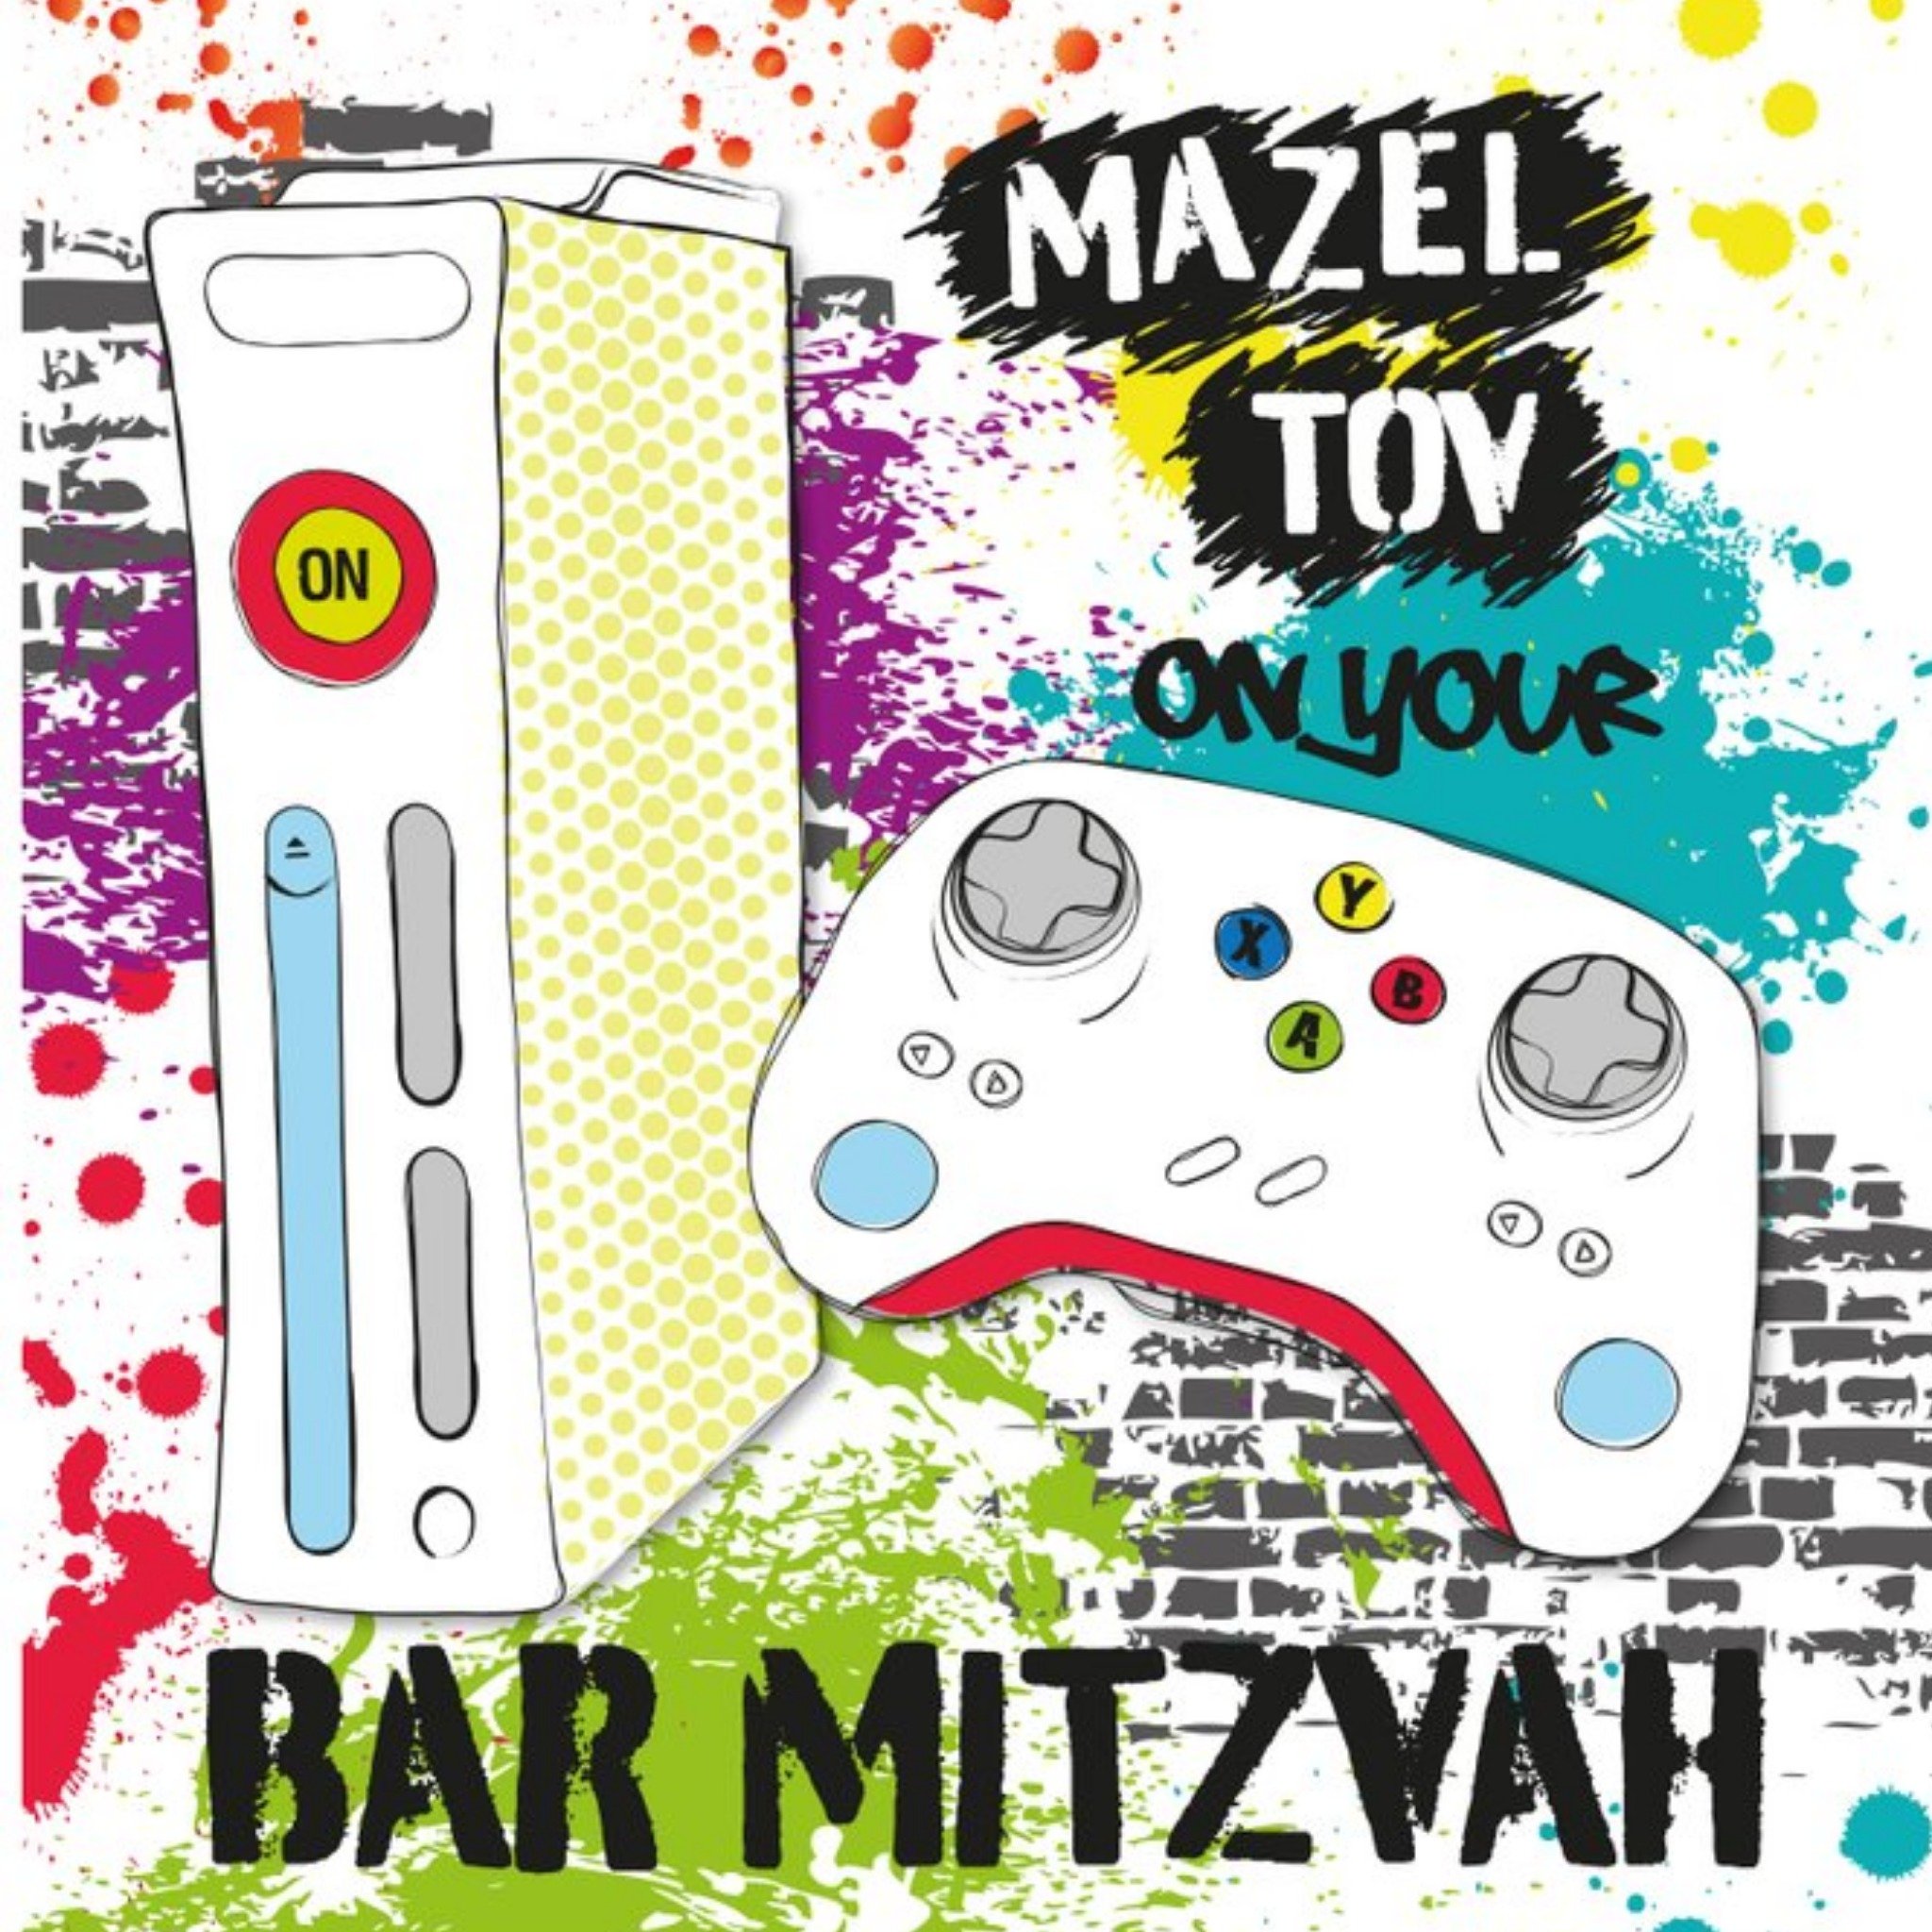 Moonpig Mazel Tov On Your Bar Mitzvah Games Console Card, Square